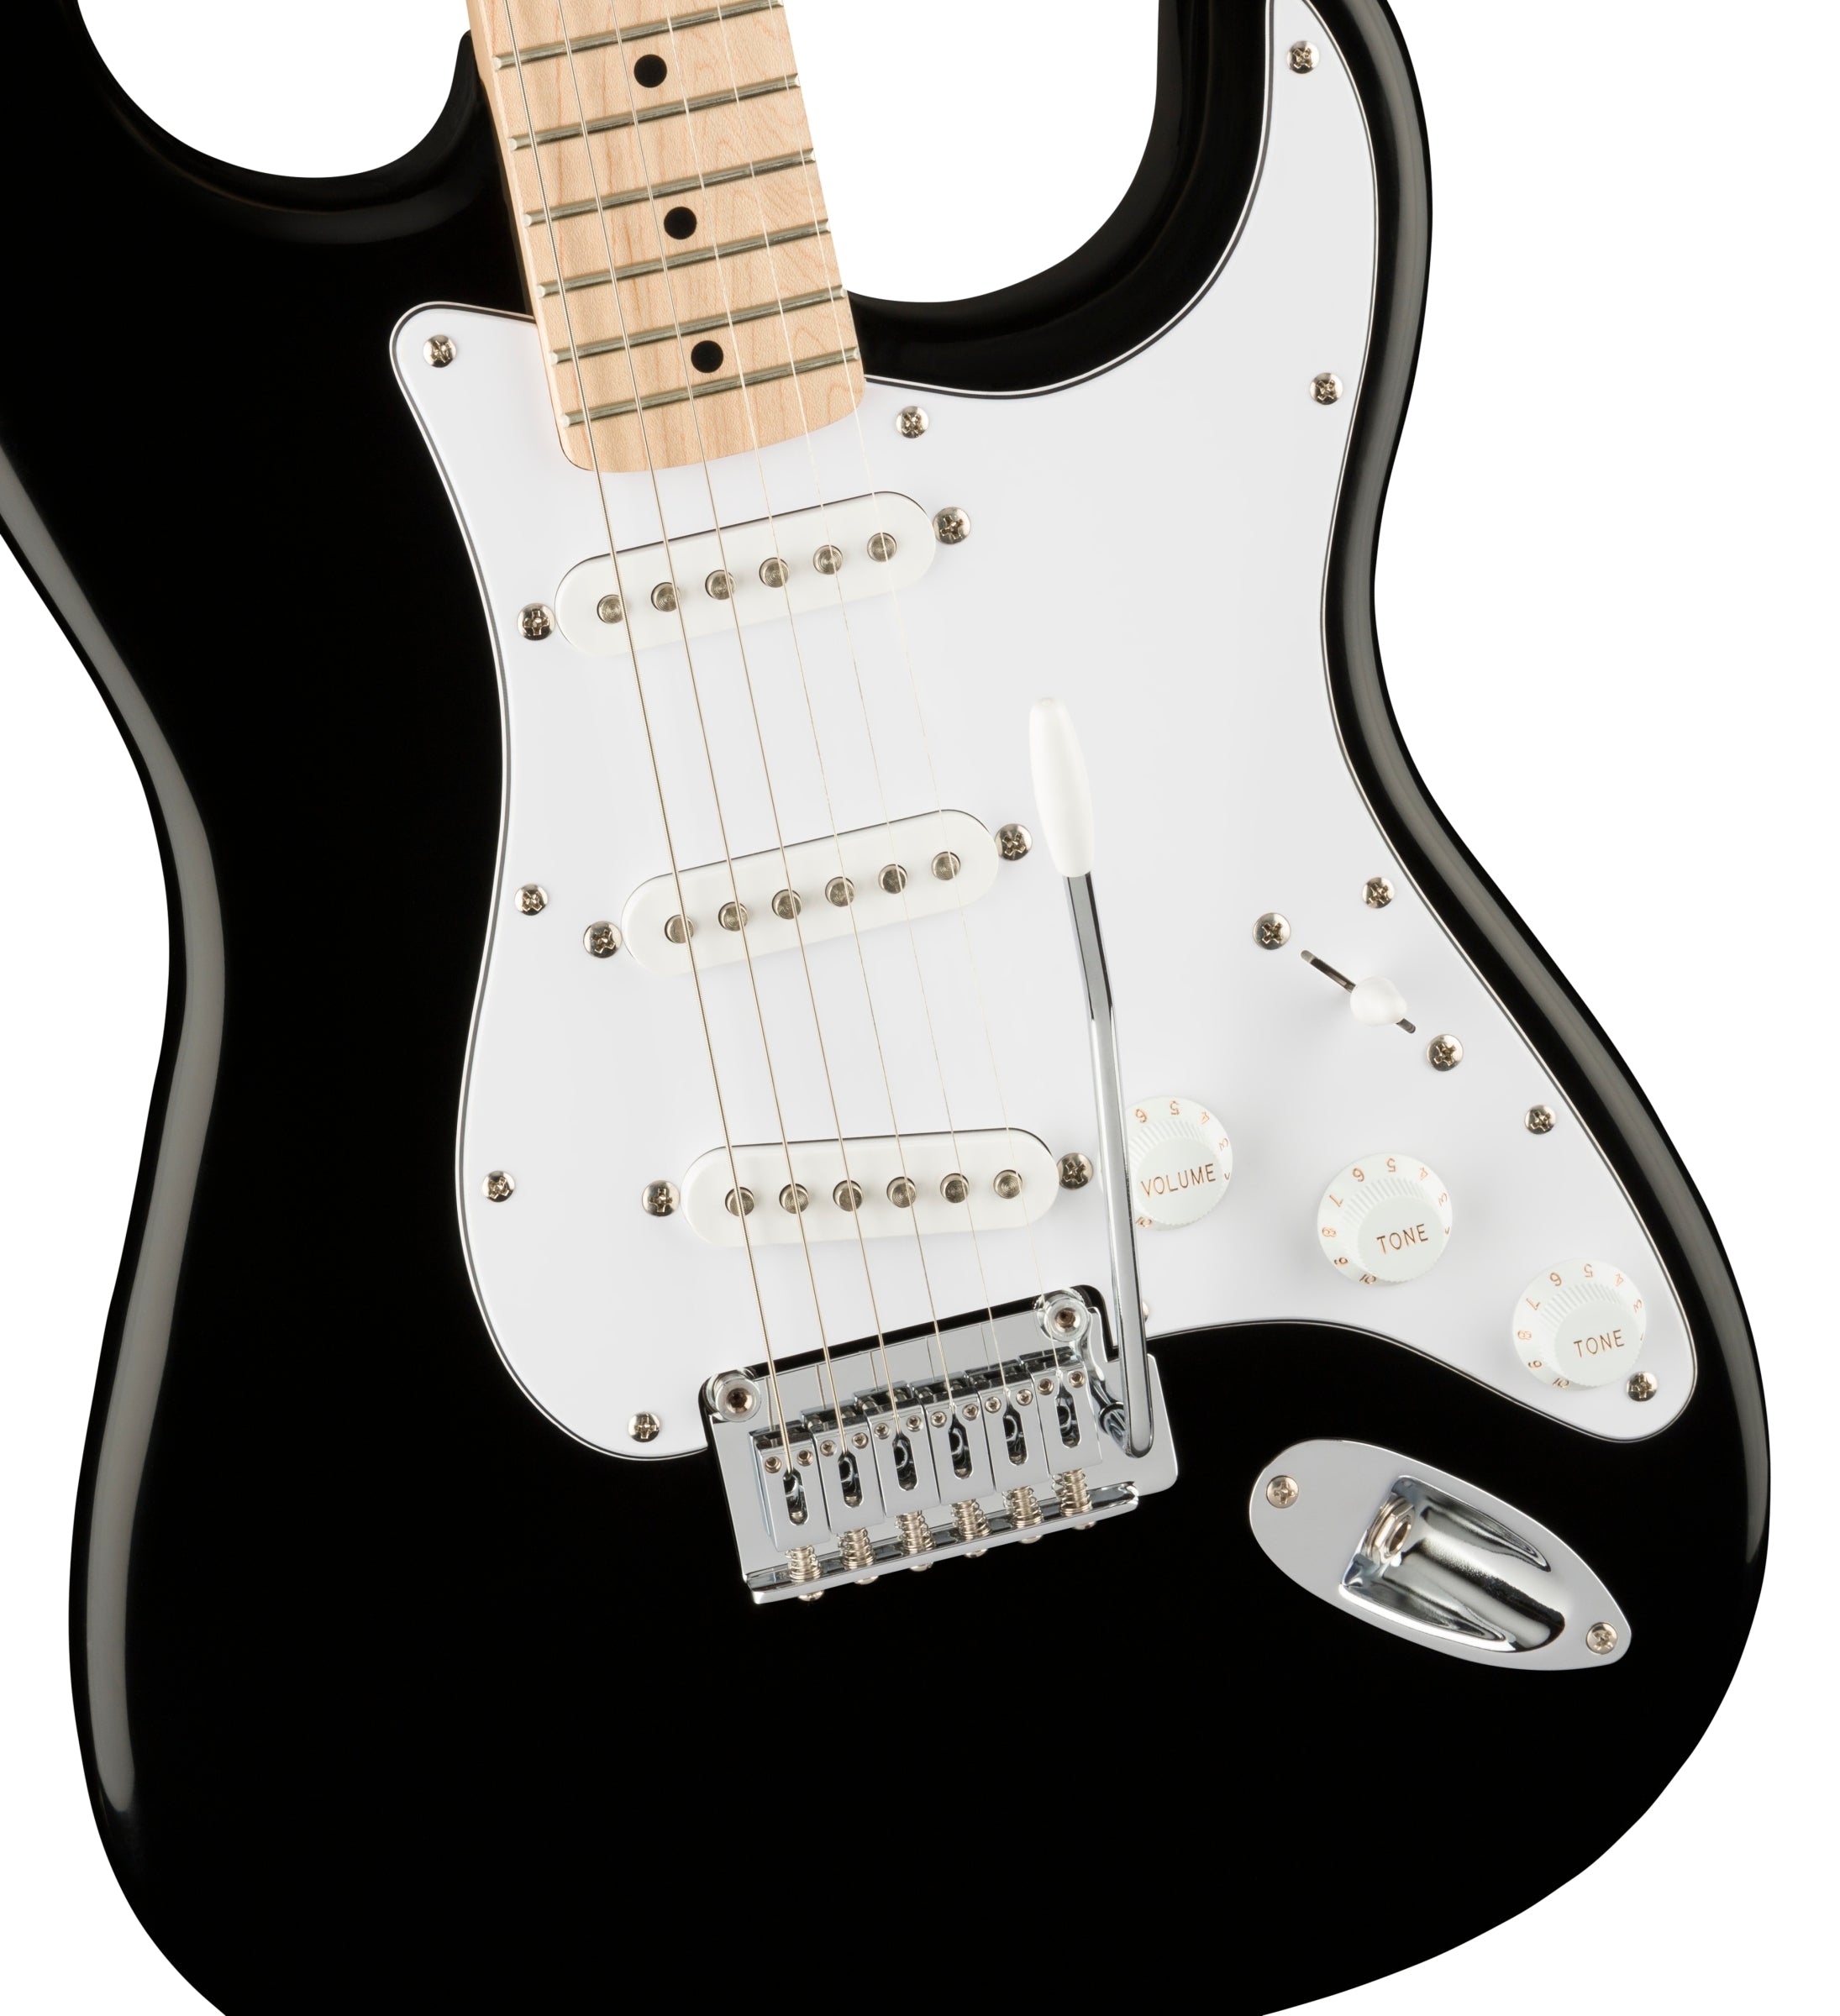 Squier Affinity Series Stratocaster Electric Guitar - Black